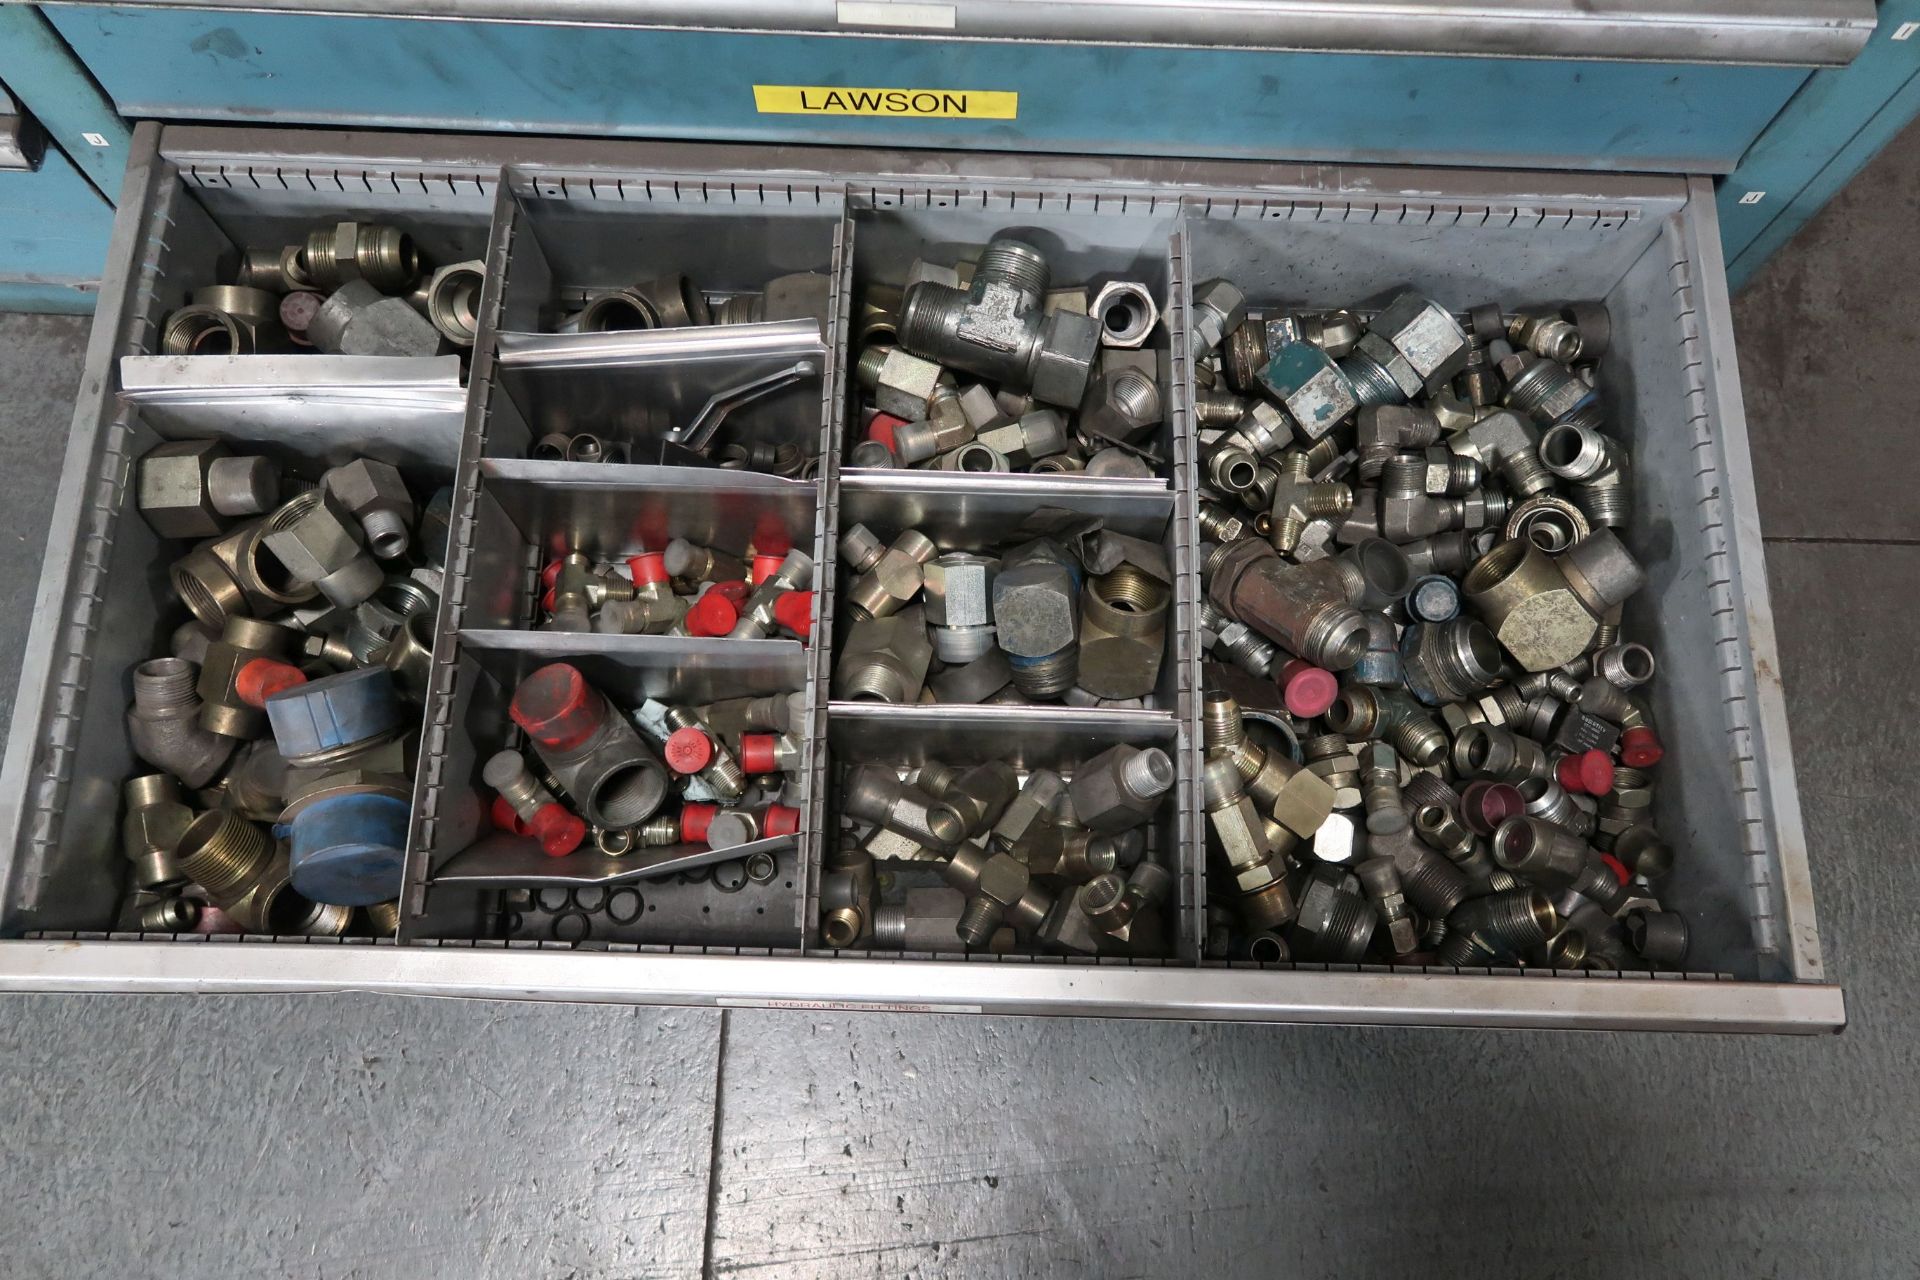 TOOLING CABINETS WITH CONTENTS - MOSTLY MACHINE PARTS **LOADING PRICE DUE TO ERRA - $2,000.00** - Image 8 of 59